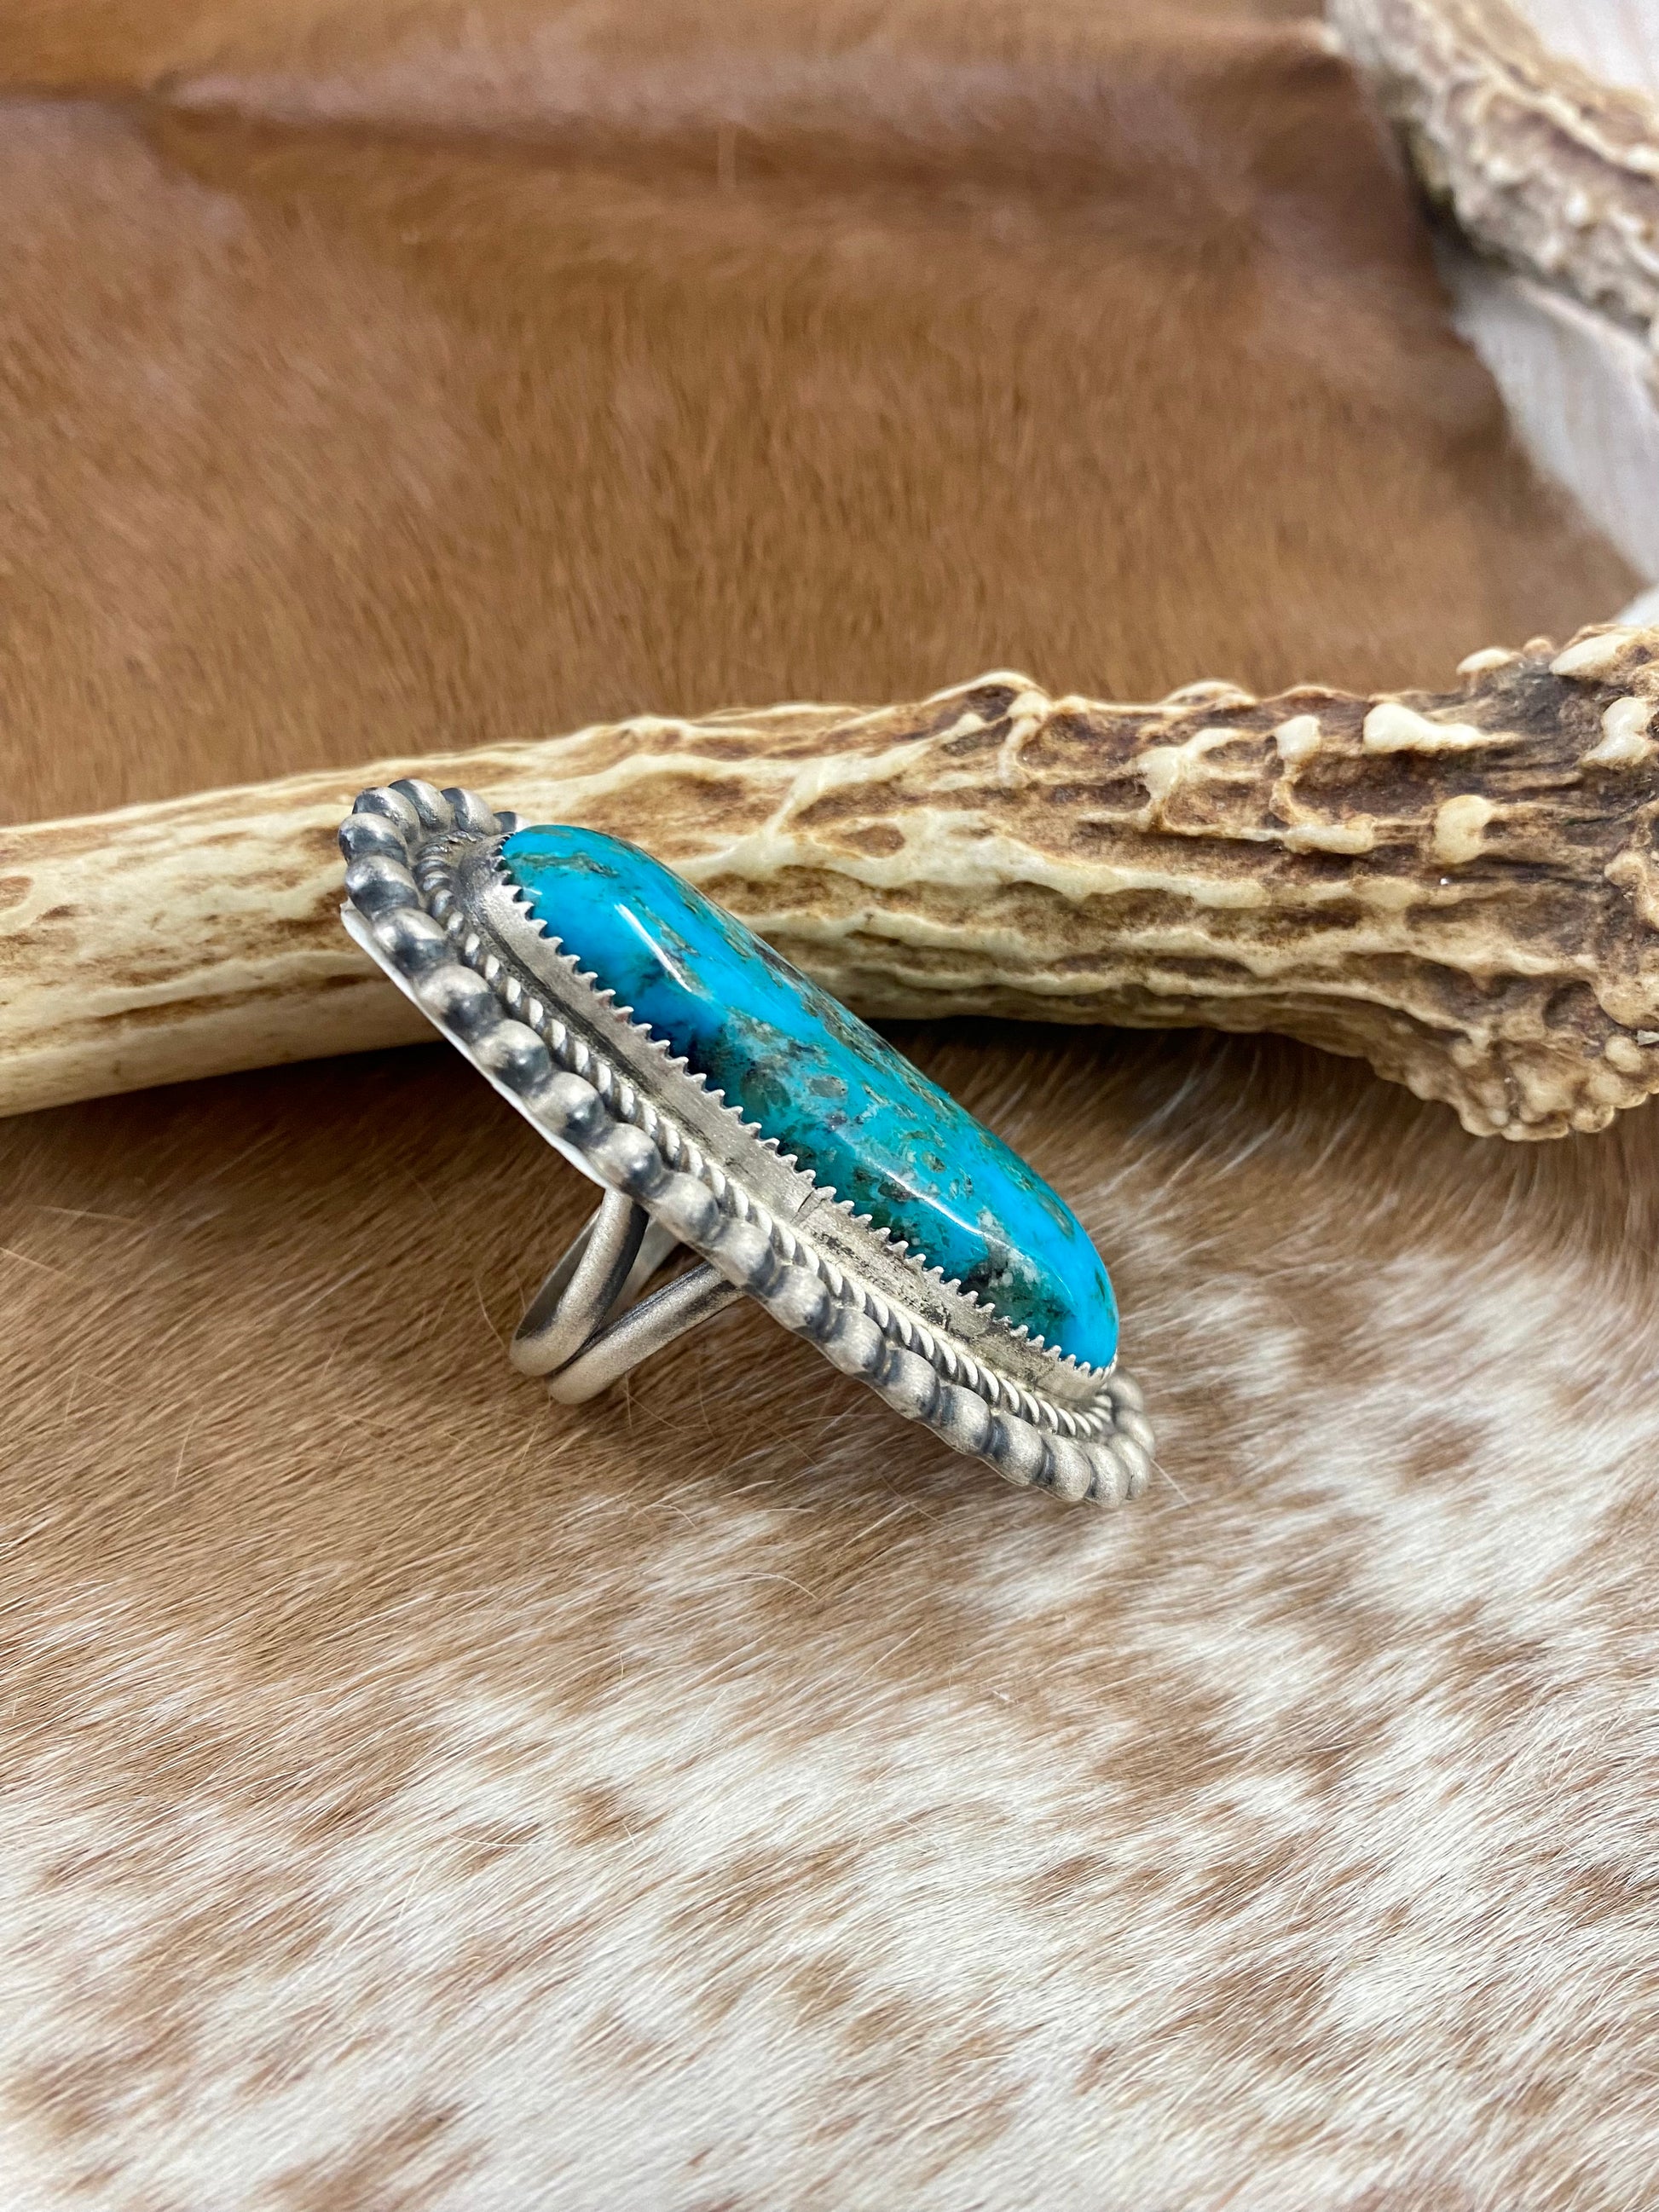 Kingman turquoise single-stone sterling silver large ring. Stamped sterling and signed "Leslie Nez” on the back by Native American artist silversmith Leslie Nez. Available in size 7.5. The perfect piece to add to your accessory wardrobe and jewelry collection.   Size: 2.5 Inches Length X 1 1/4” Inch Width    Stone: Kingman Turquoise   Signed: YES “Leslie Nez”   Hallmark: Leslie Nez